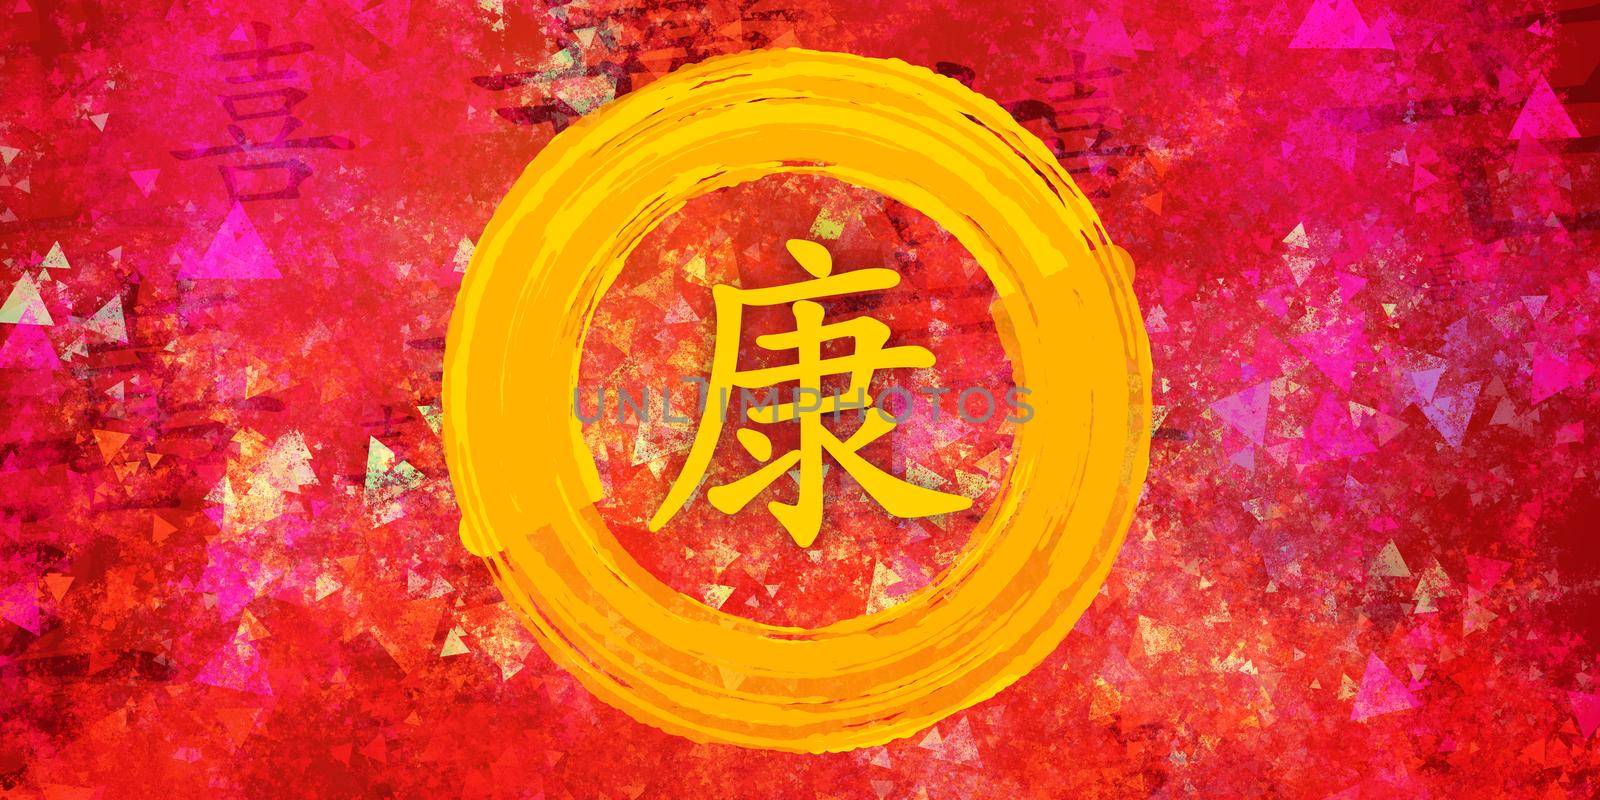 Health in Chinese Calligraphy on Creative Paint Background